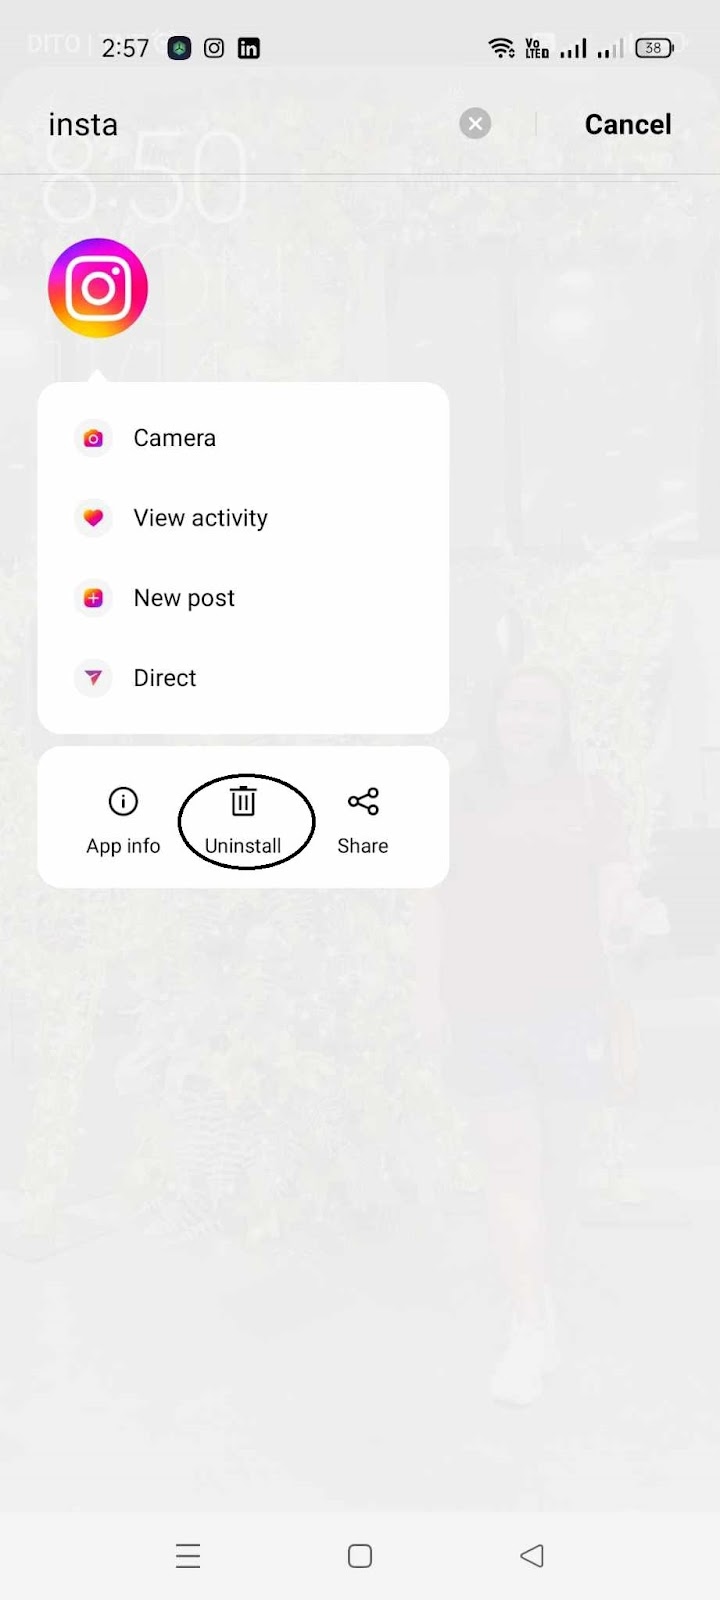 Unable to Use Effect on Instagram - Uninstall